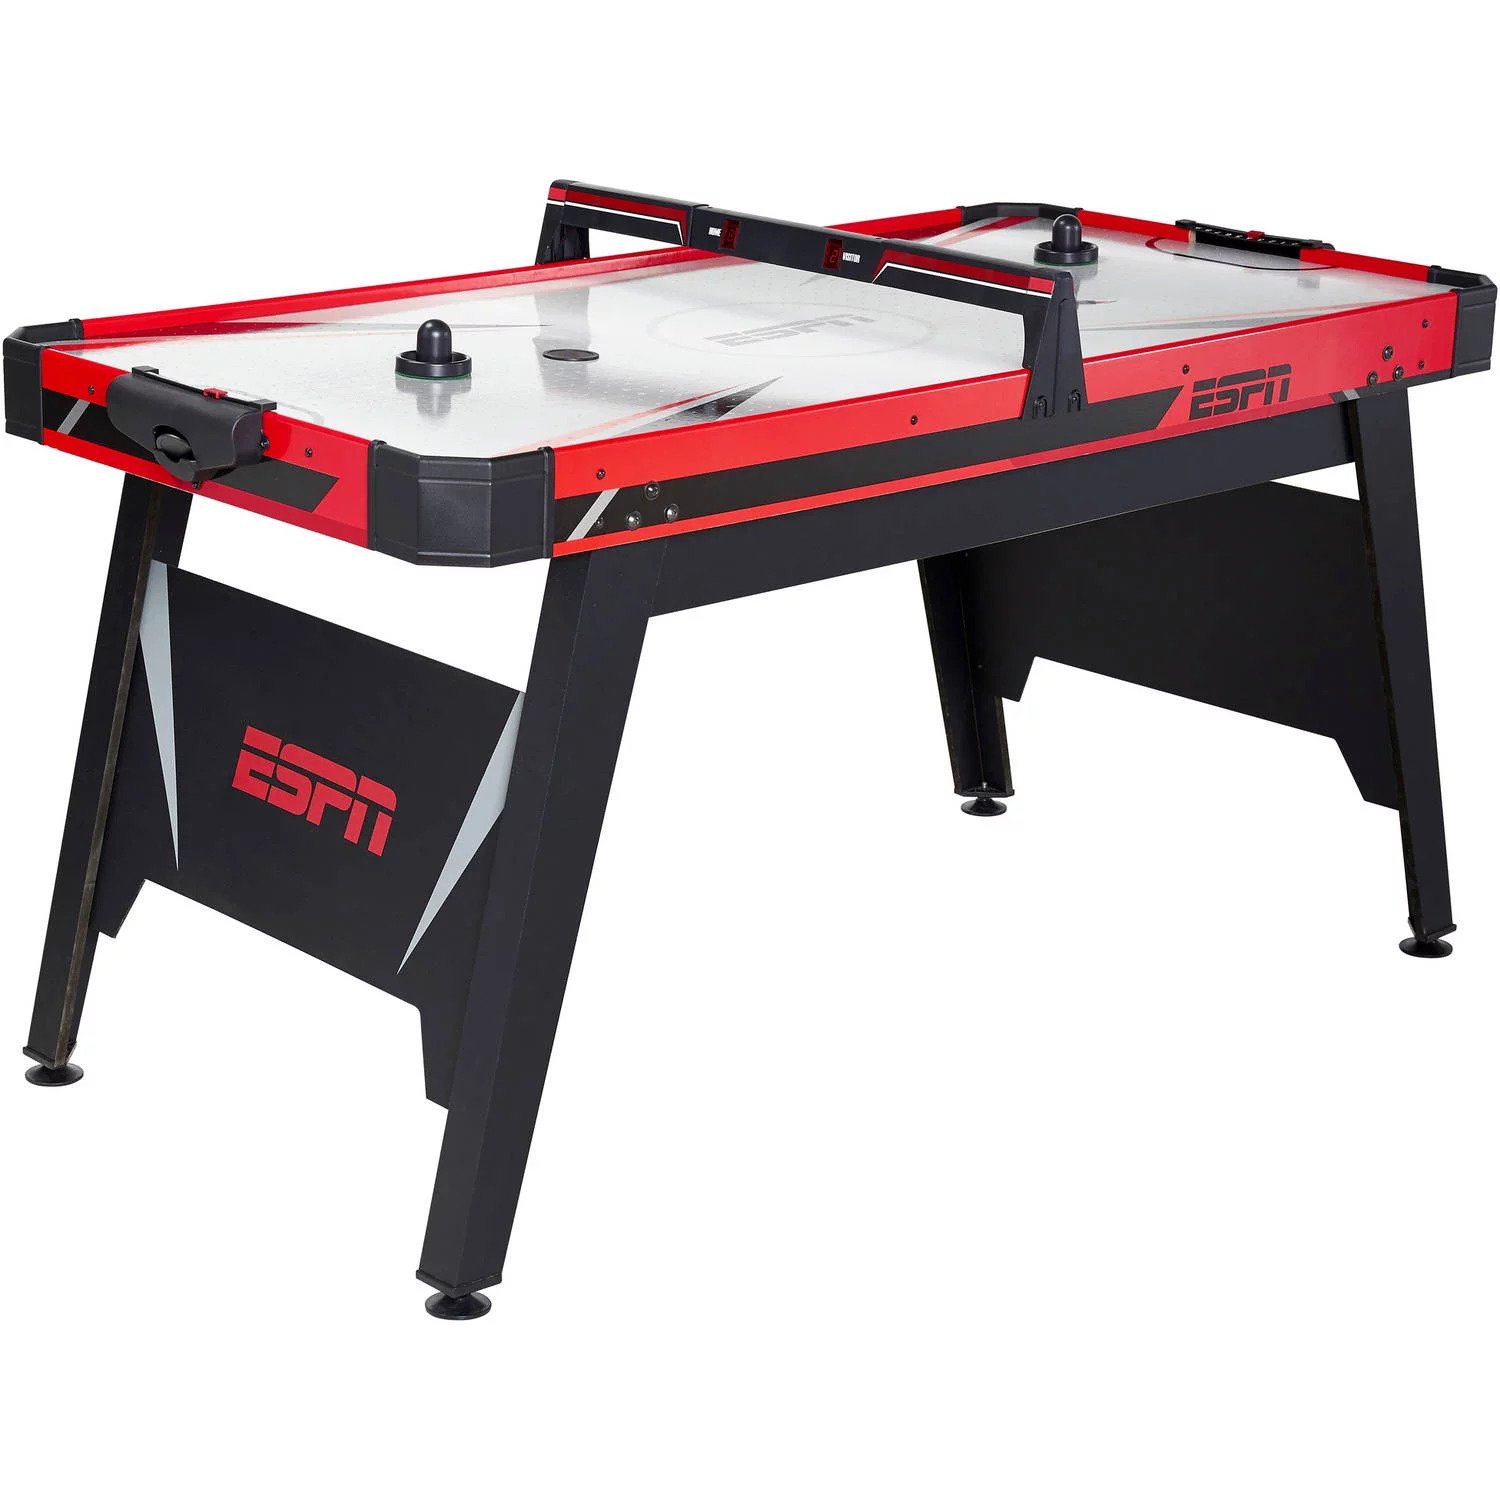 ESPN Air Hockey Table Review - A Winning Score Roundup